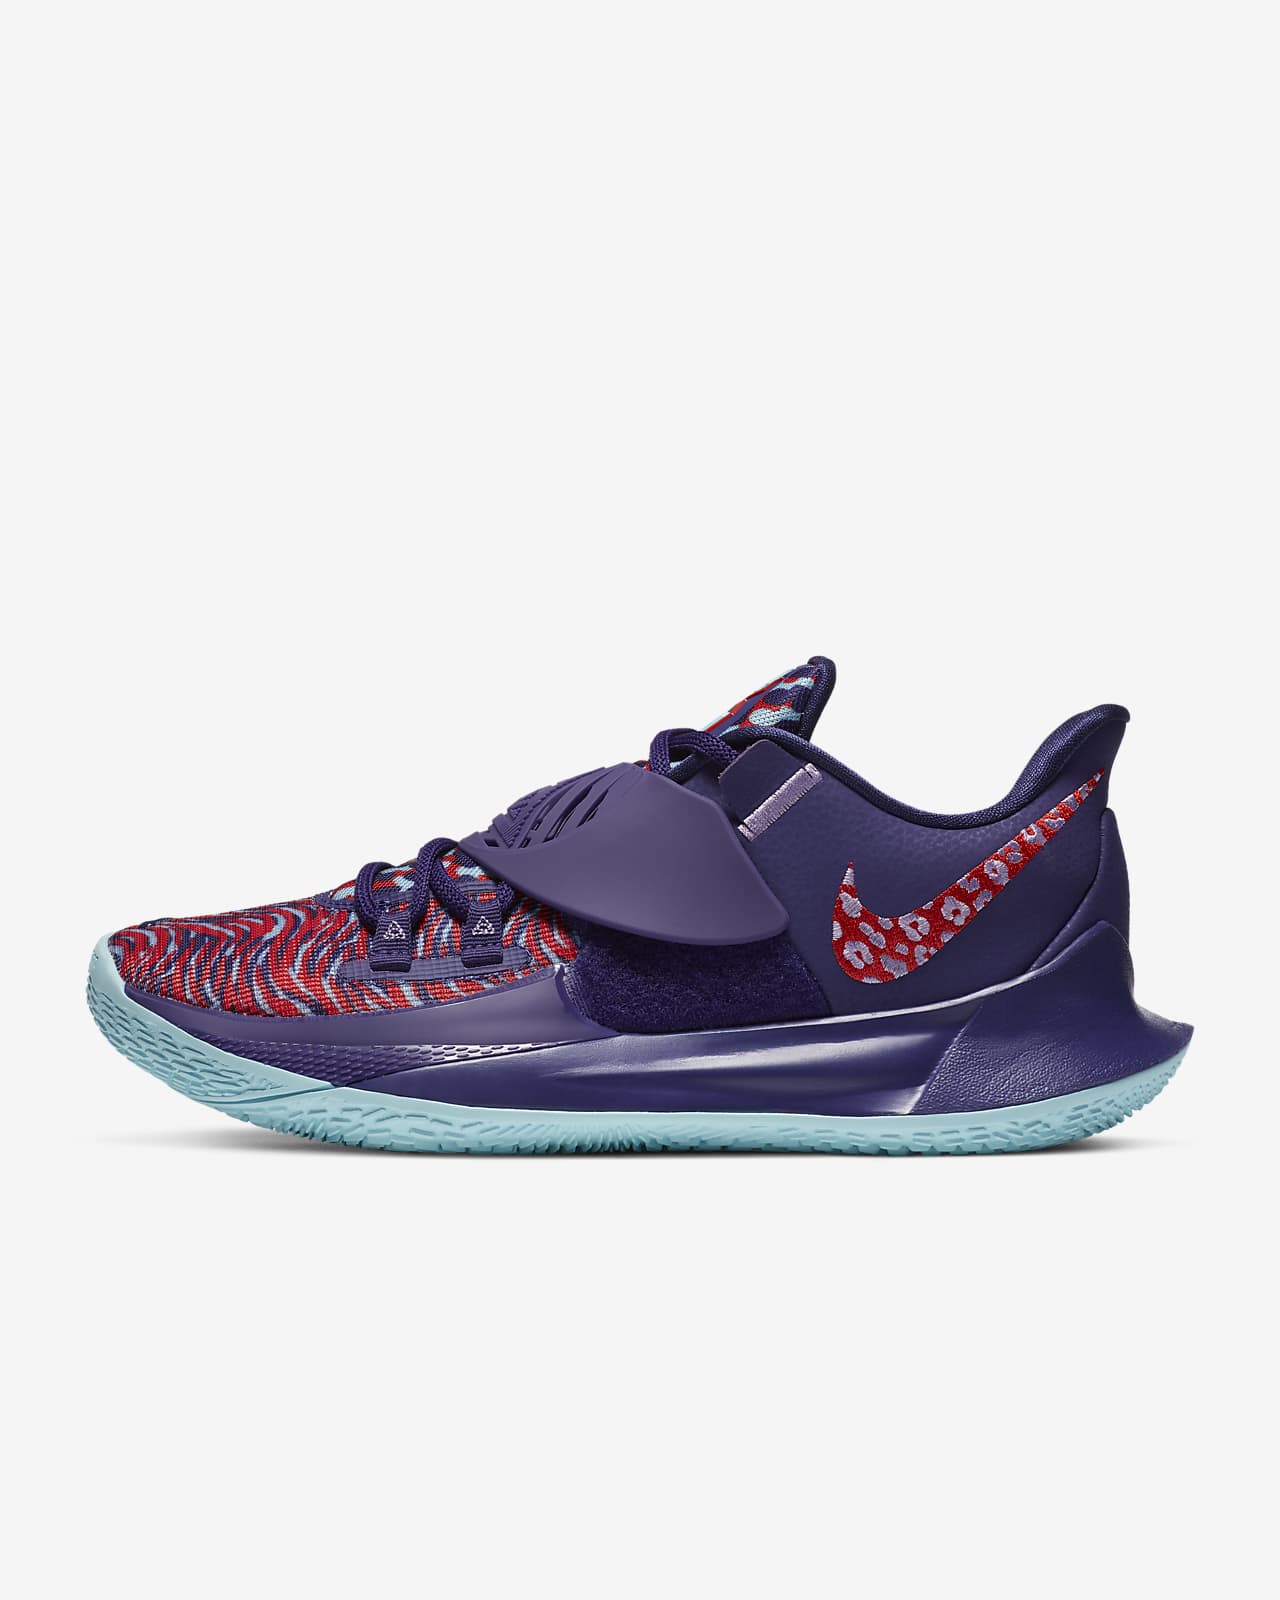 kyrie irving low